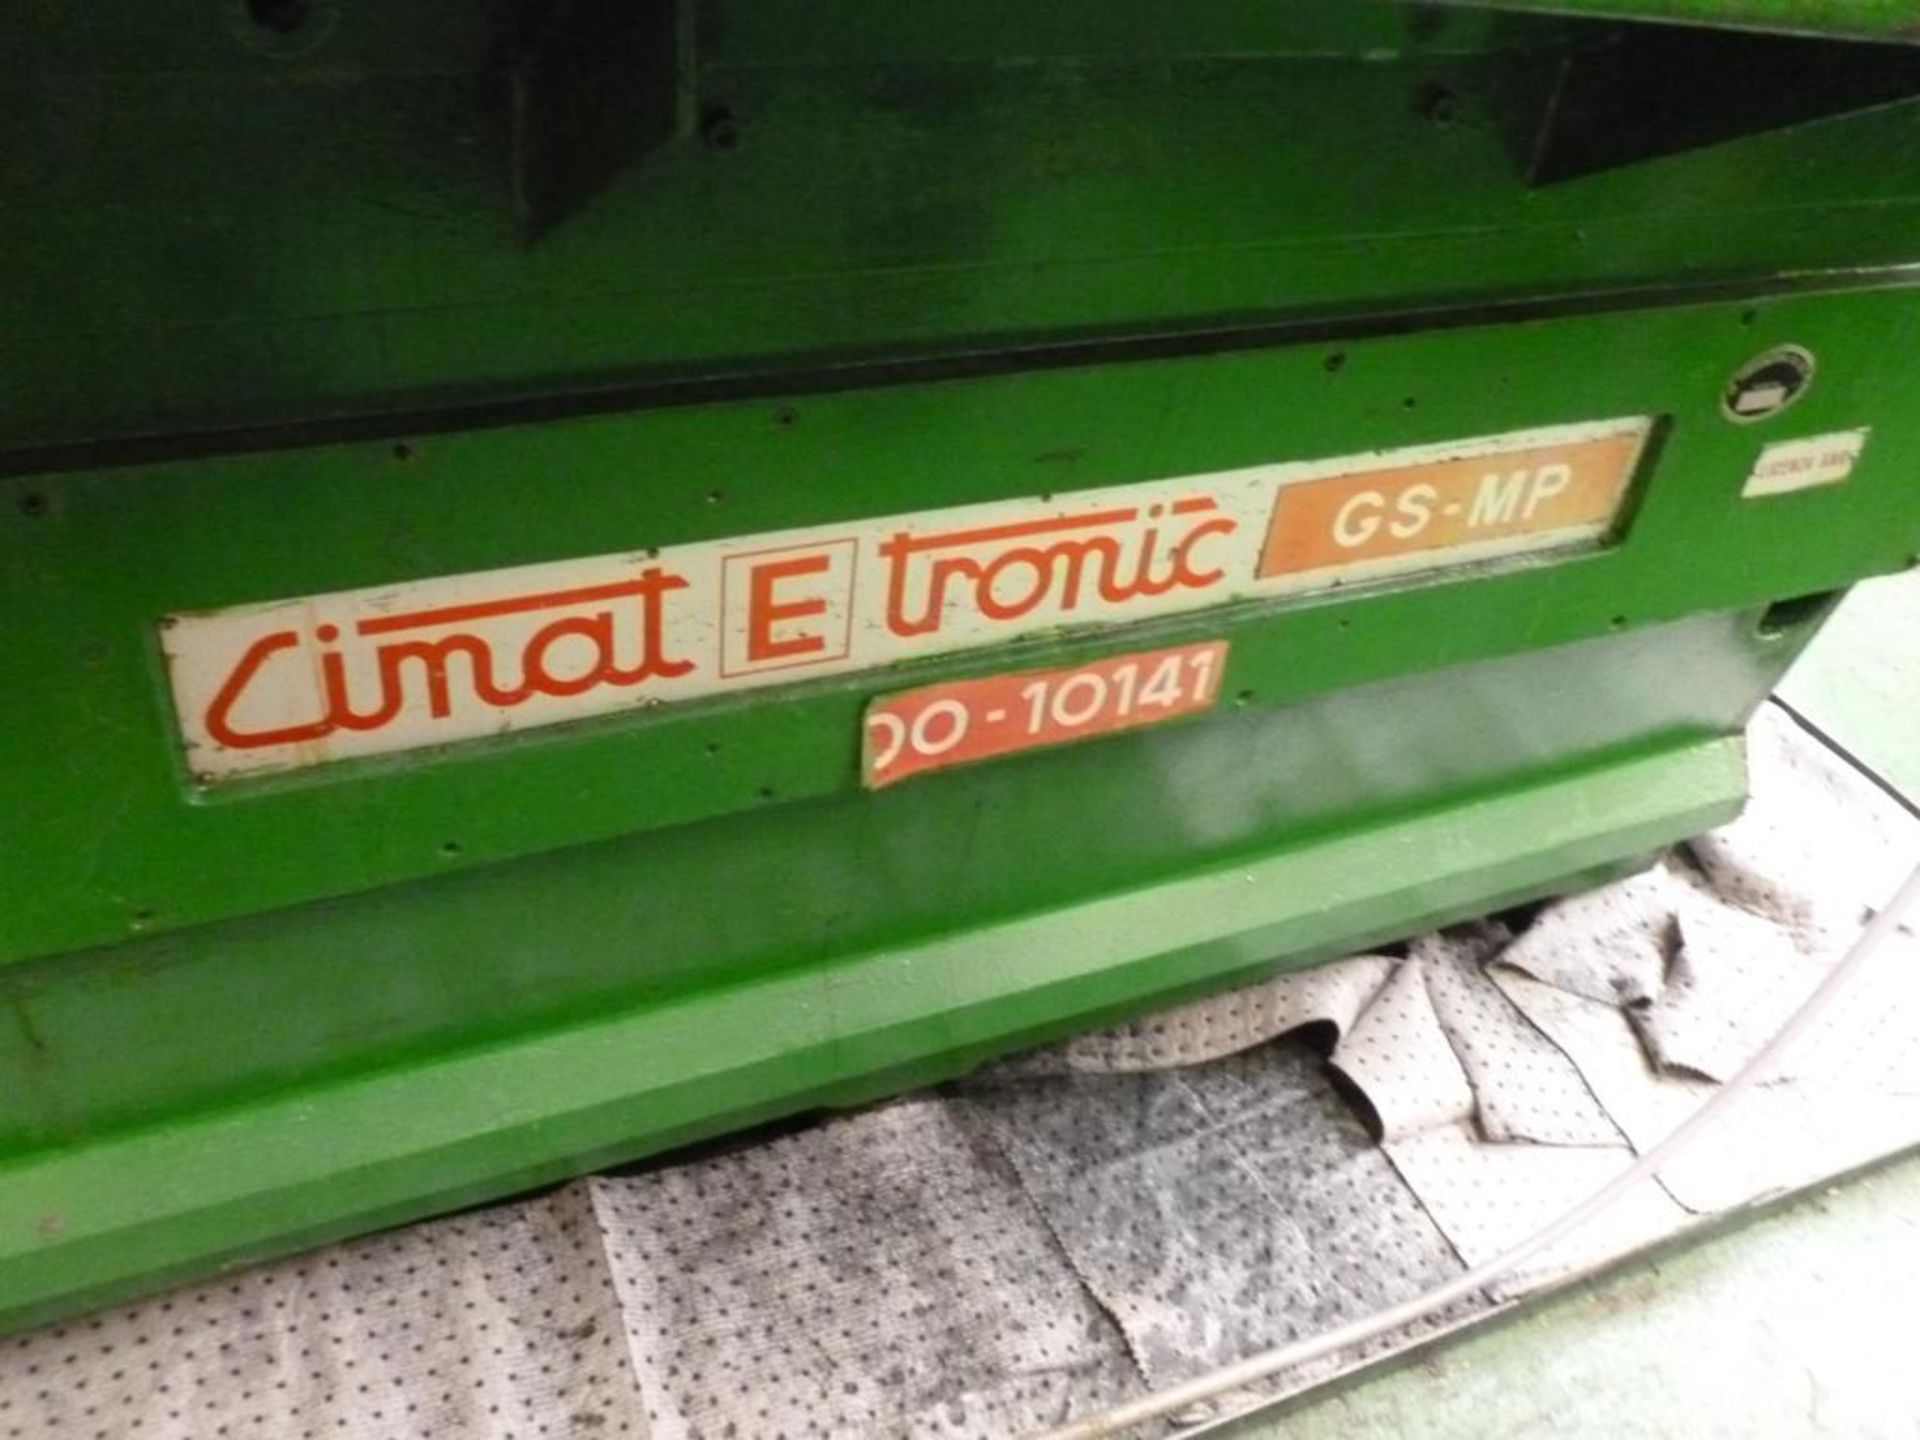 Cimat E Tronic External Grinder External Ball Race, Grinding radius of 5-25mm and diameters of - Image 2 of 2